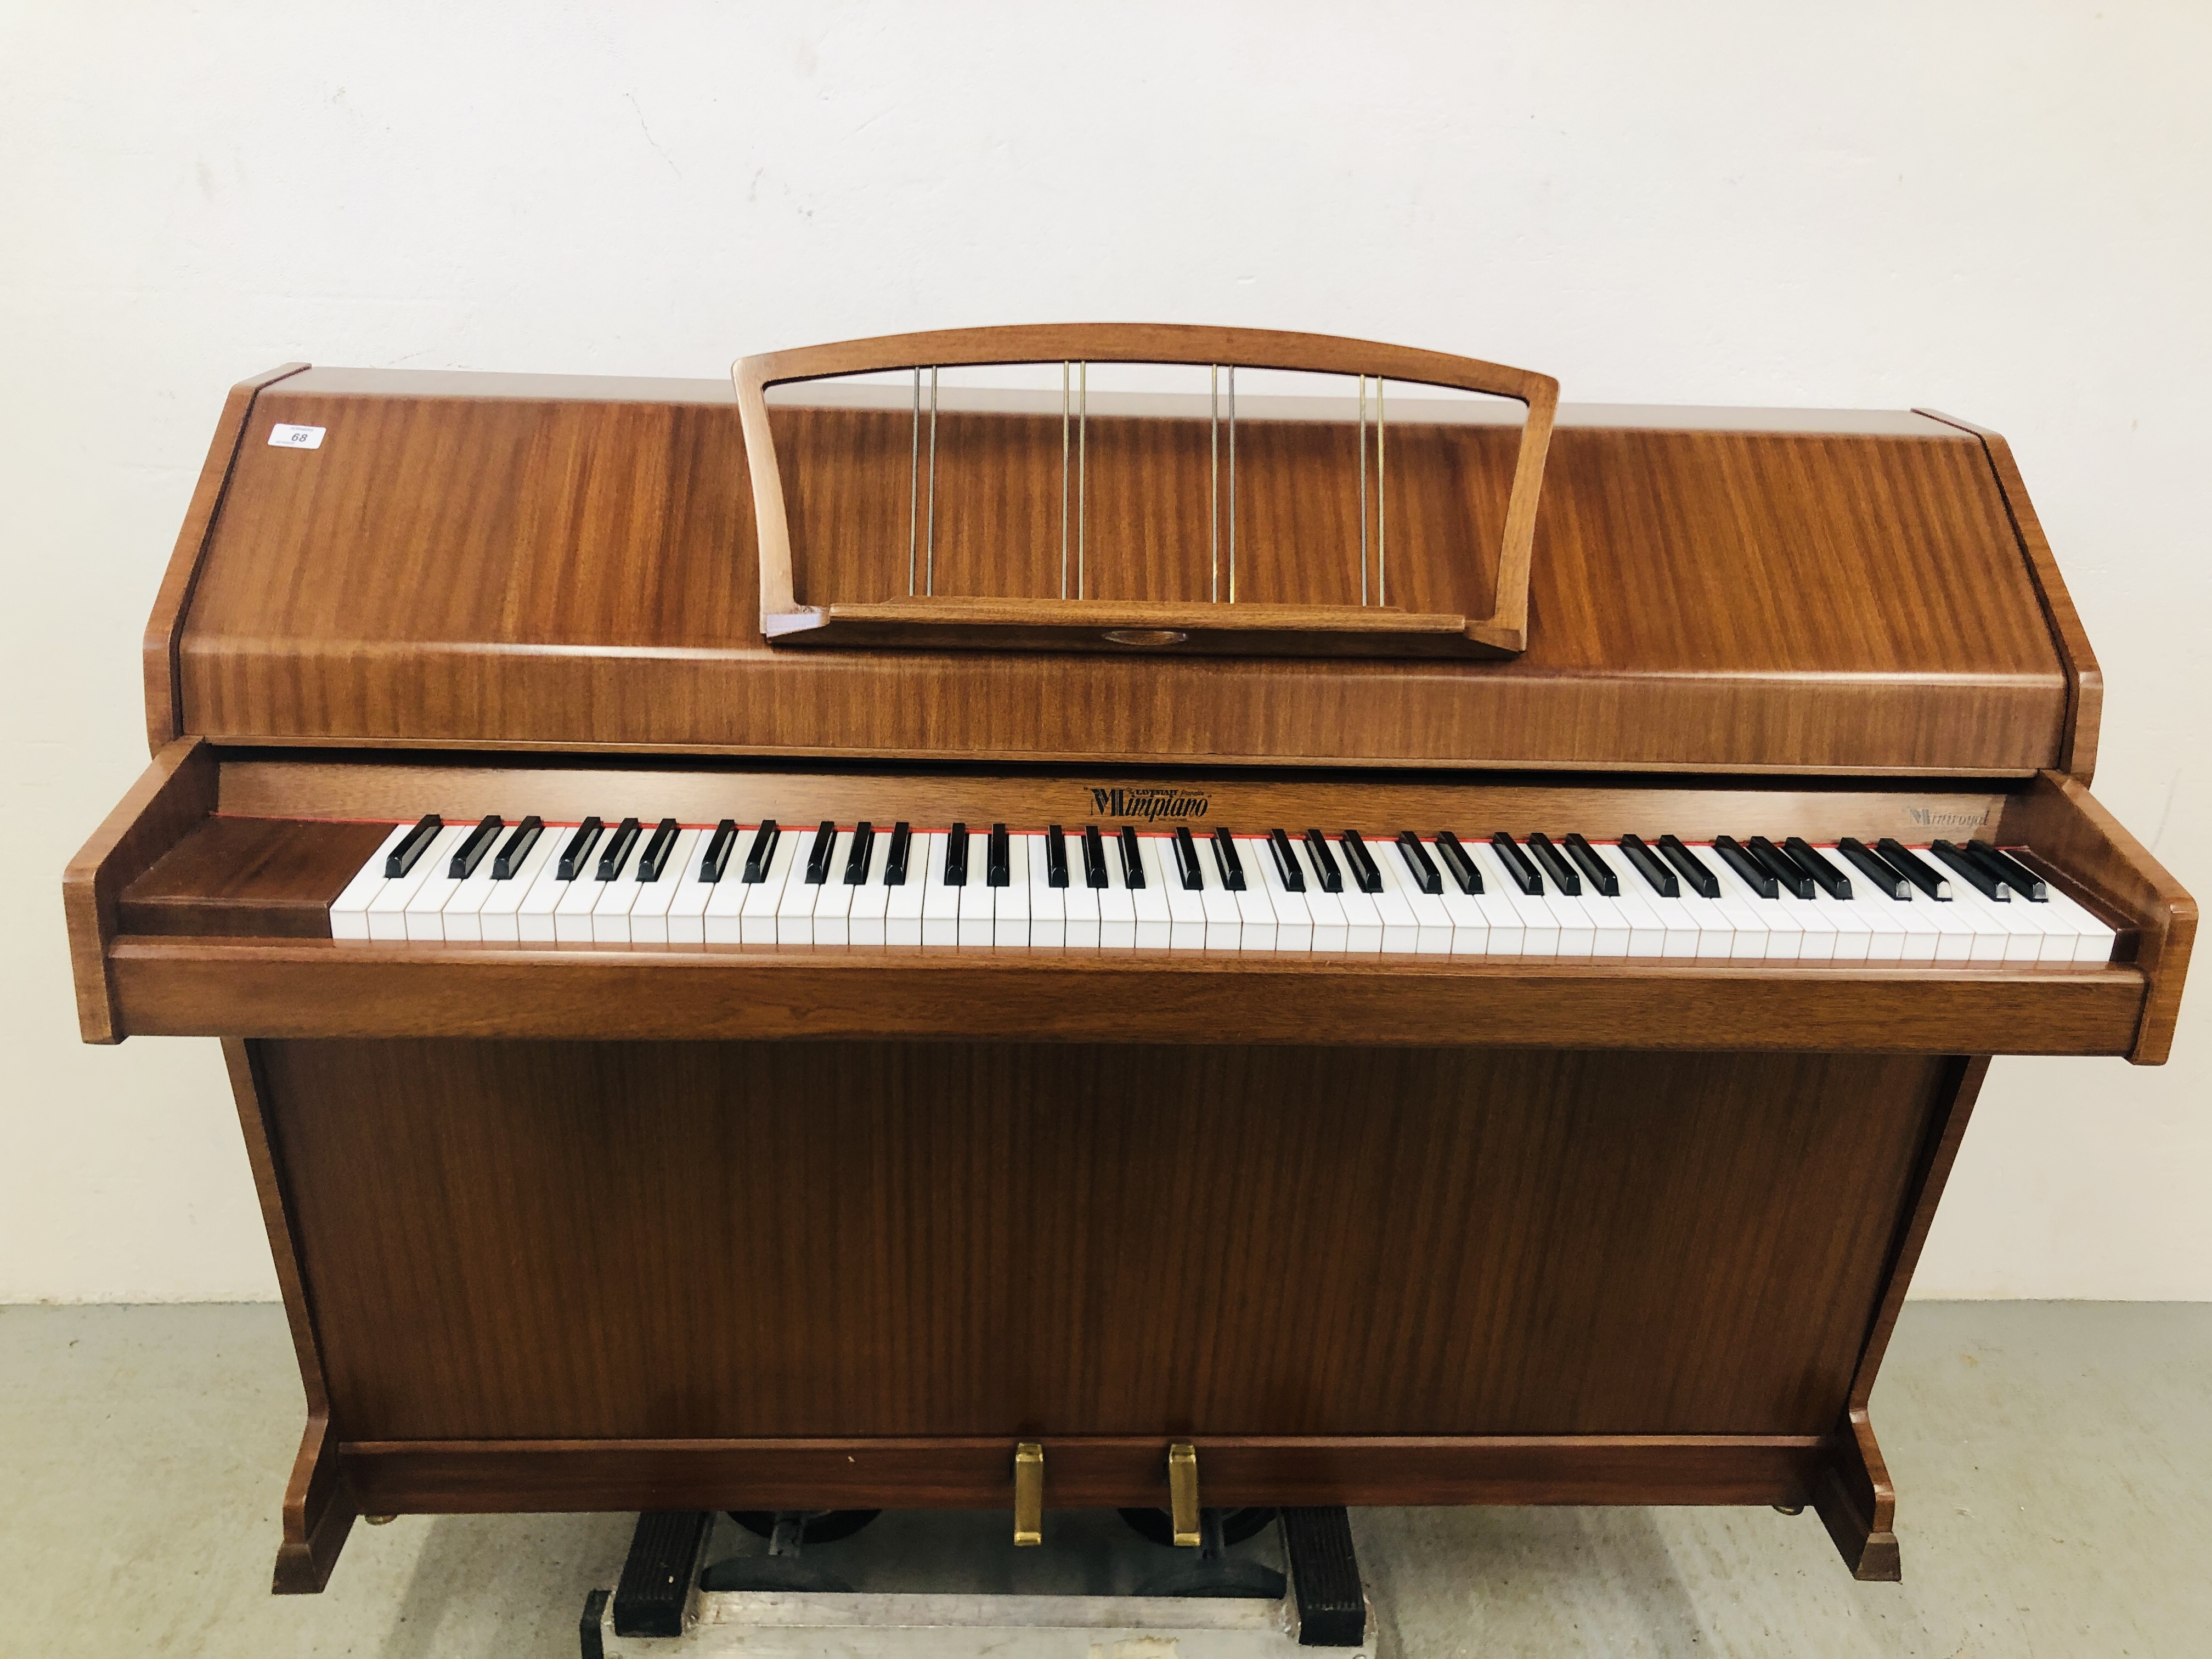 EAVESTAFF MINI PIANO "PIANETTE" UPRIGHT OVERSTRUNG PIANO AND MUSIC STOOL - Image 3 of 27